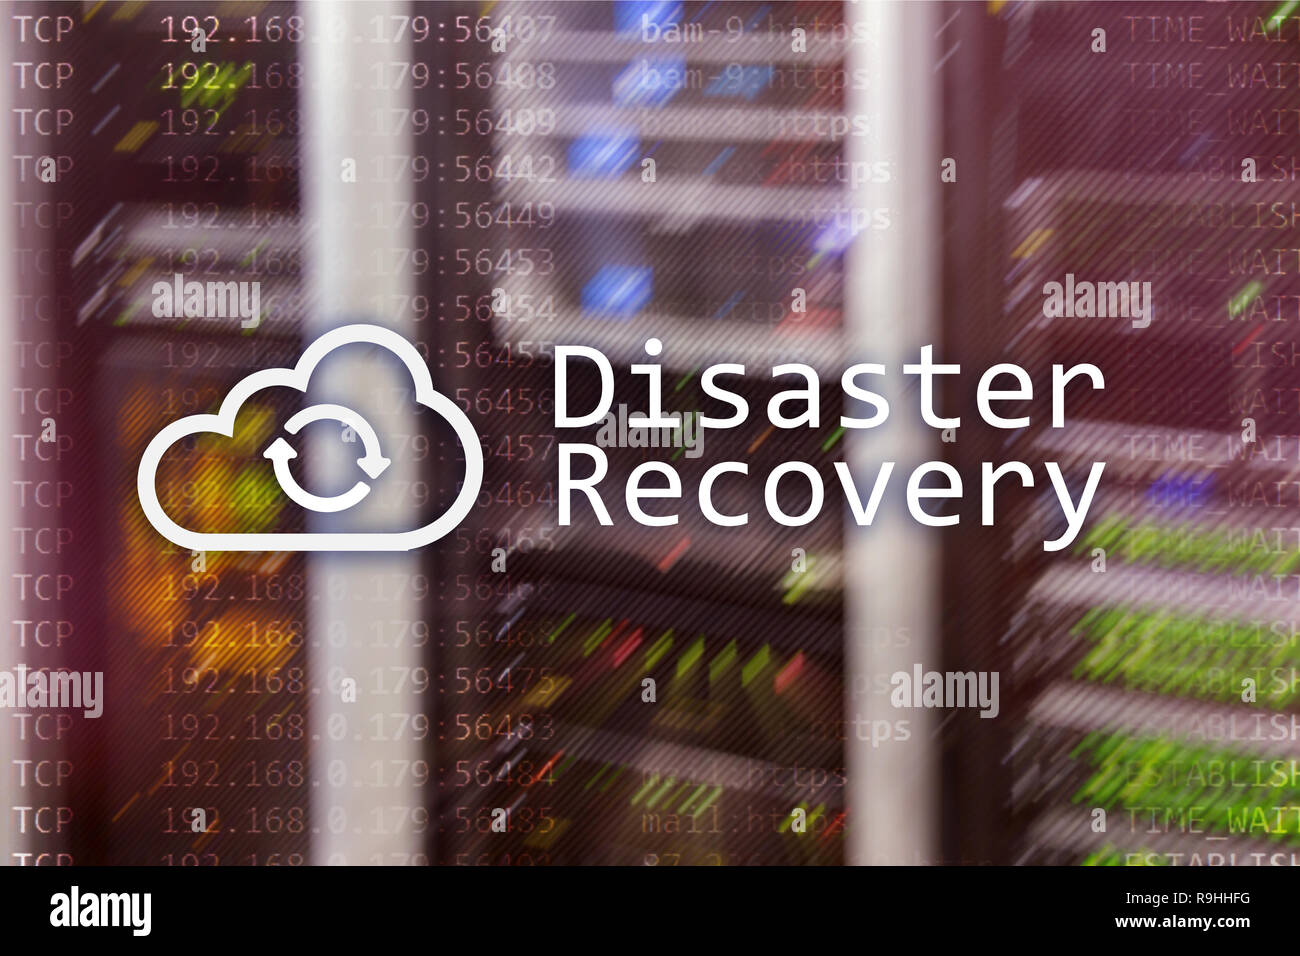 DIsaster recovery. Data loss prevention. Server room on background. Stock Photo